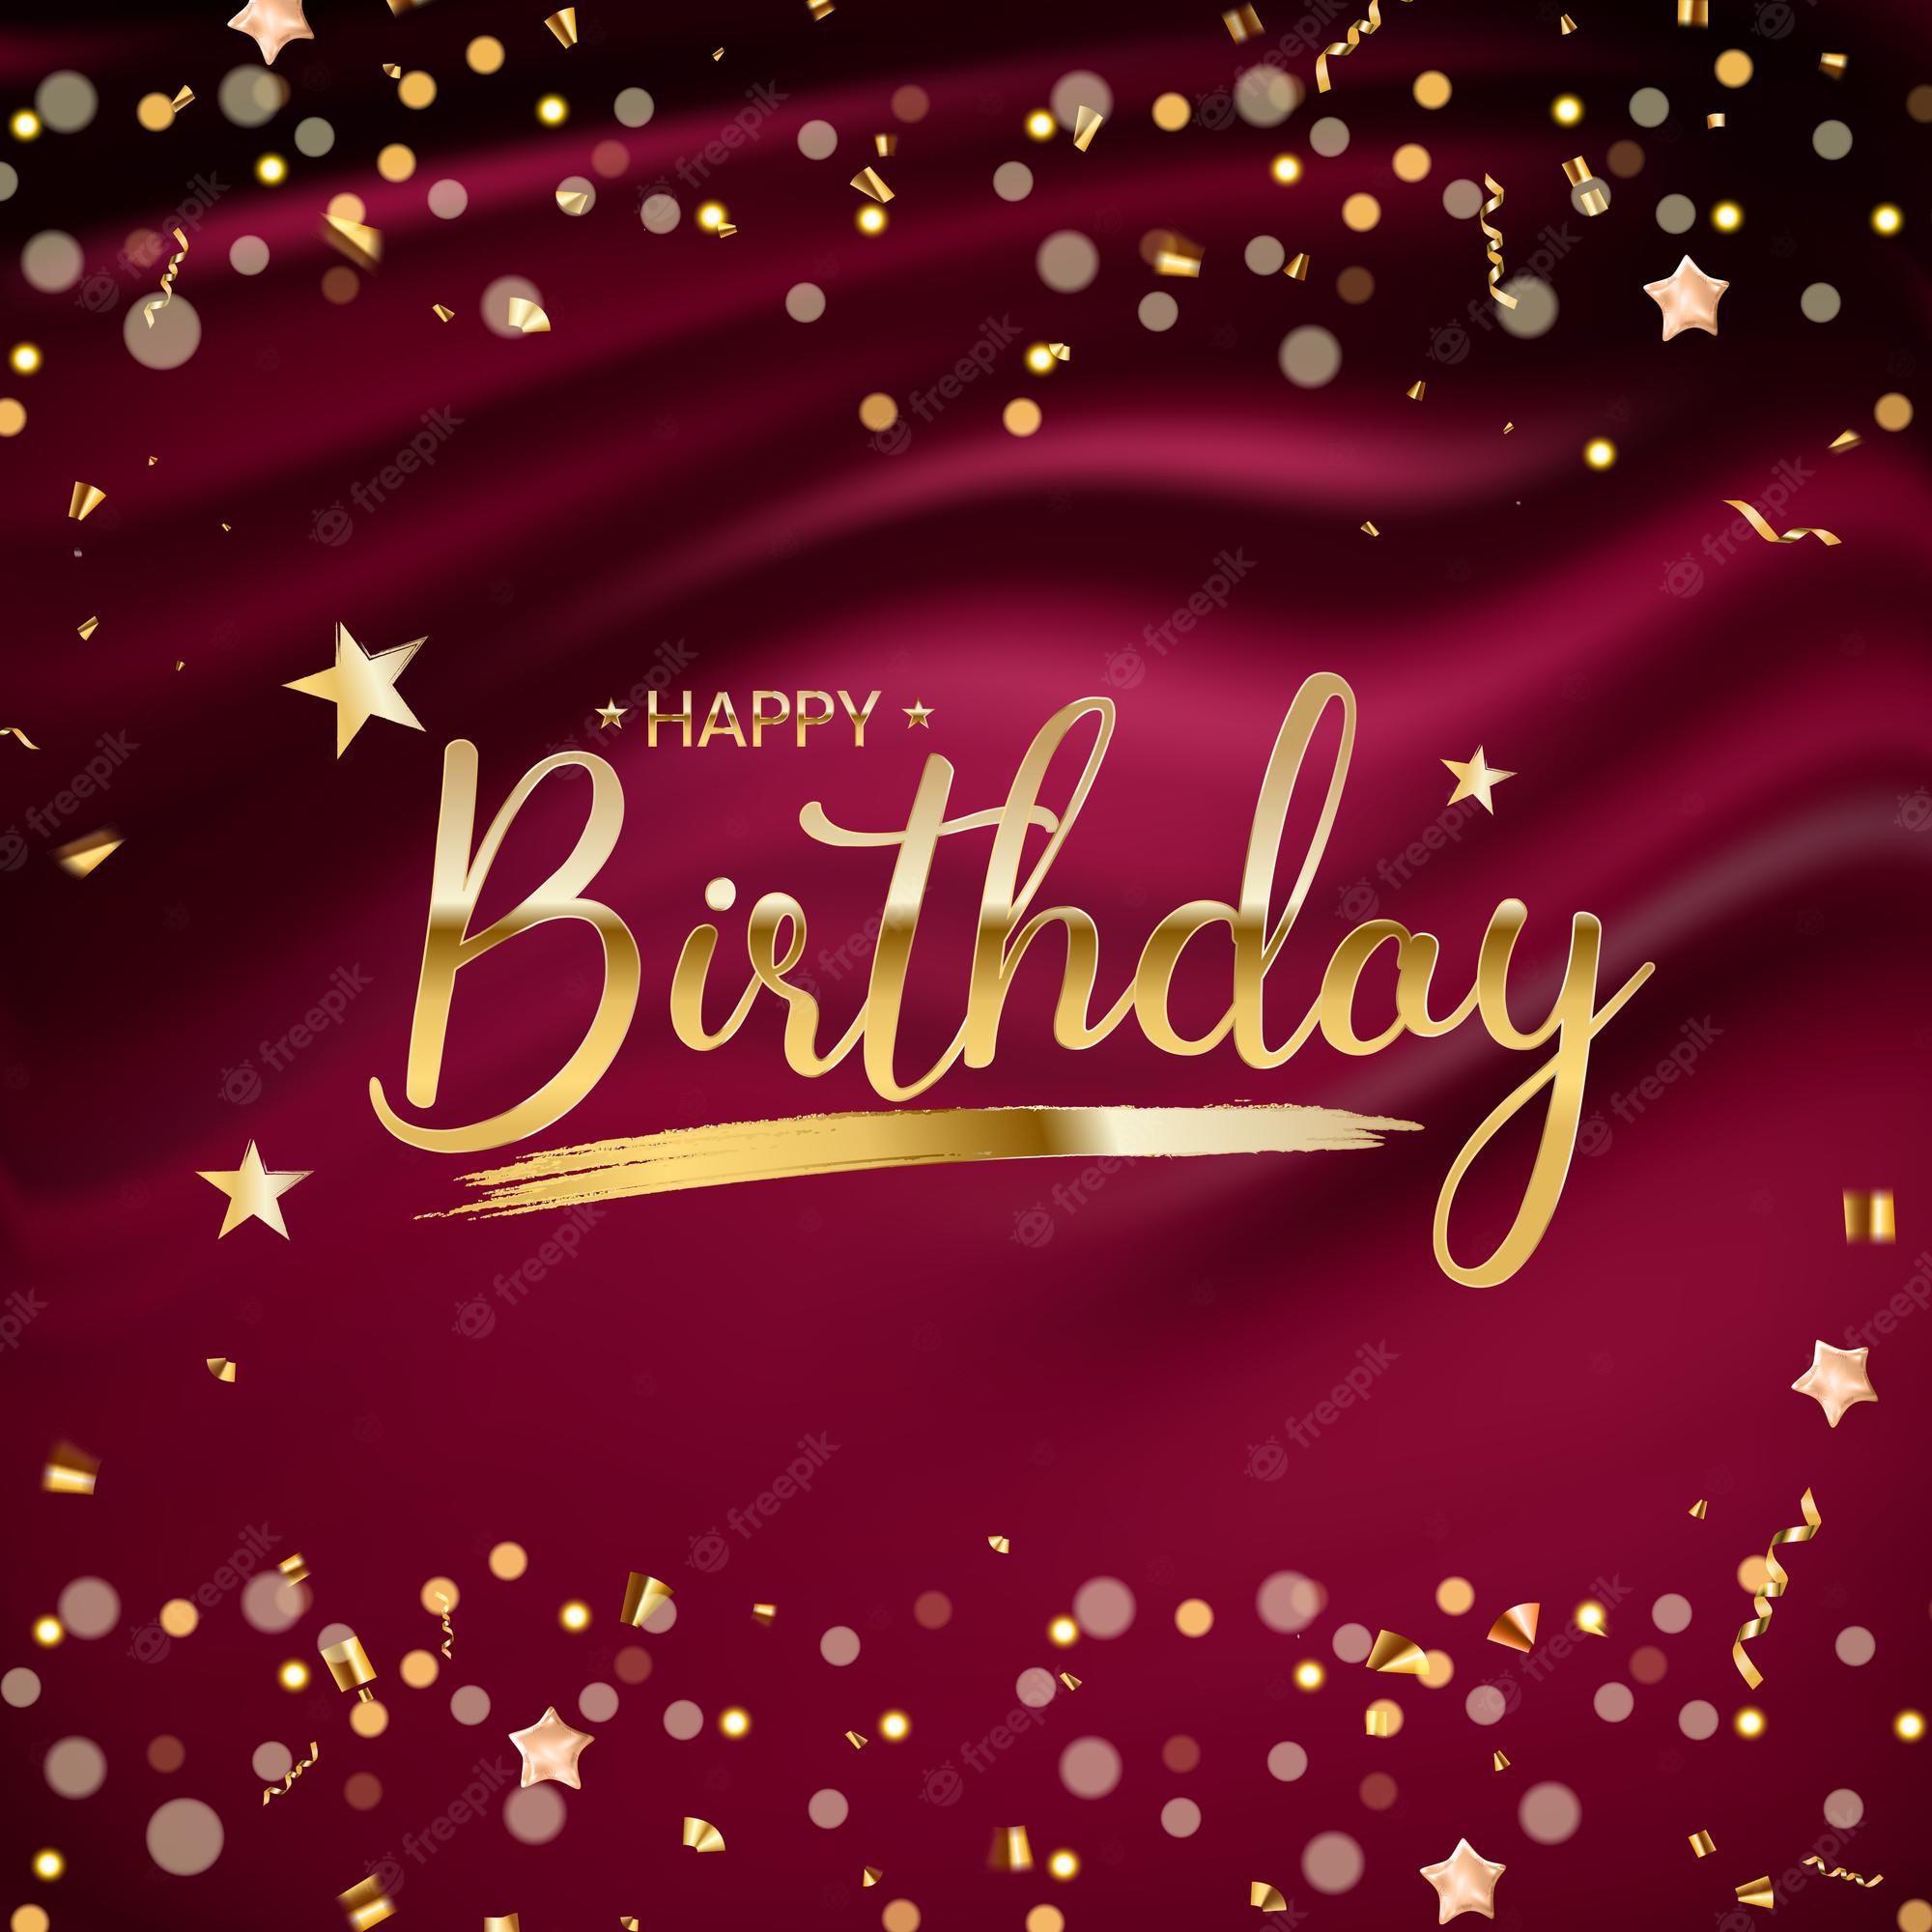 Premium Vector. Happy birthday background with golden confetti and sparkle bokeh lights. vector illustration